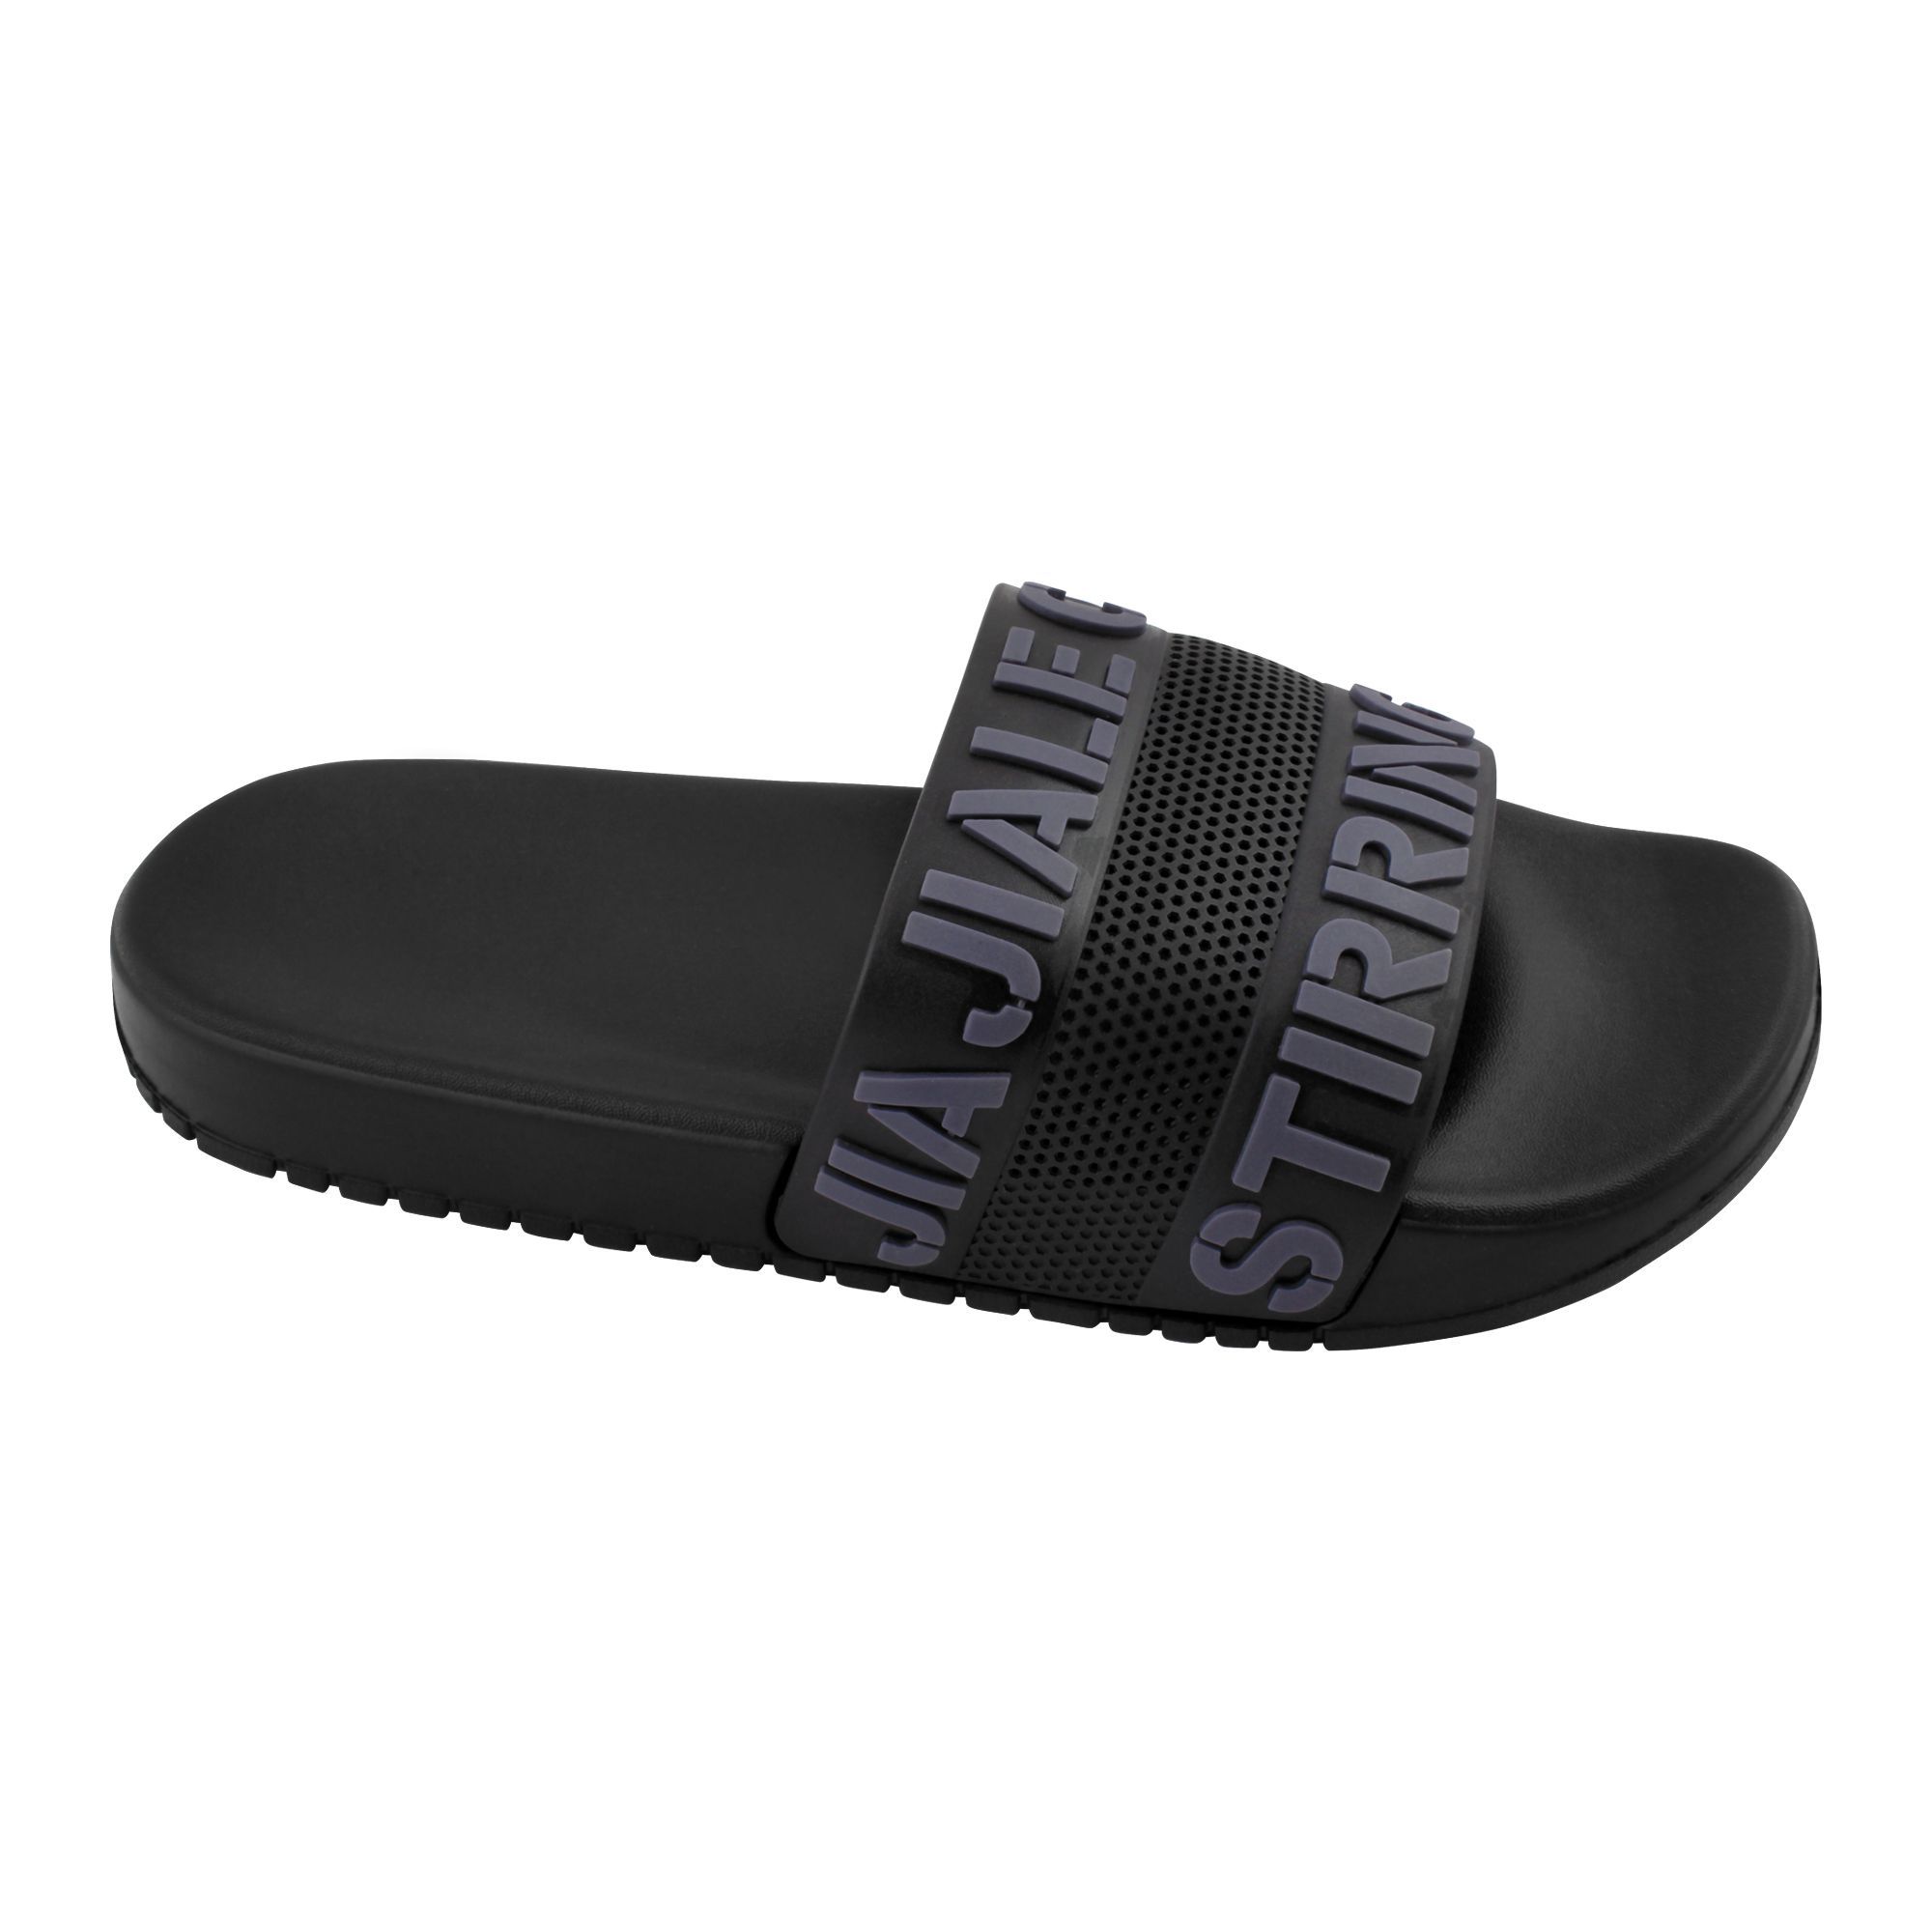 slippers online purchase